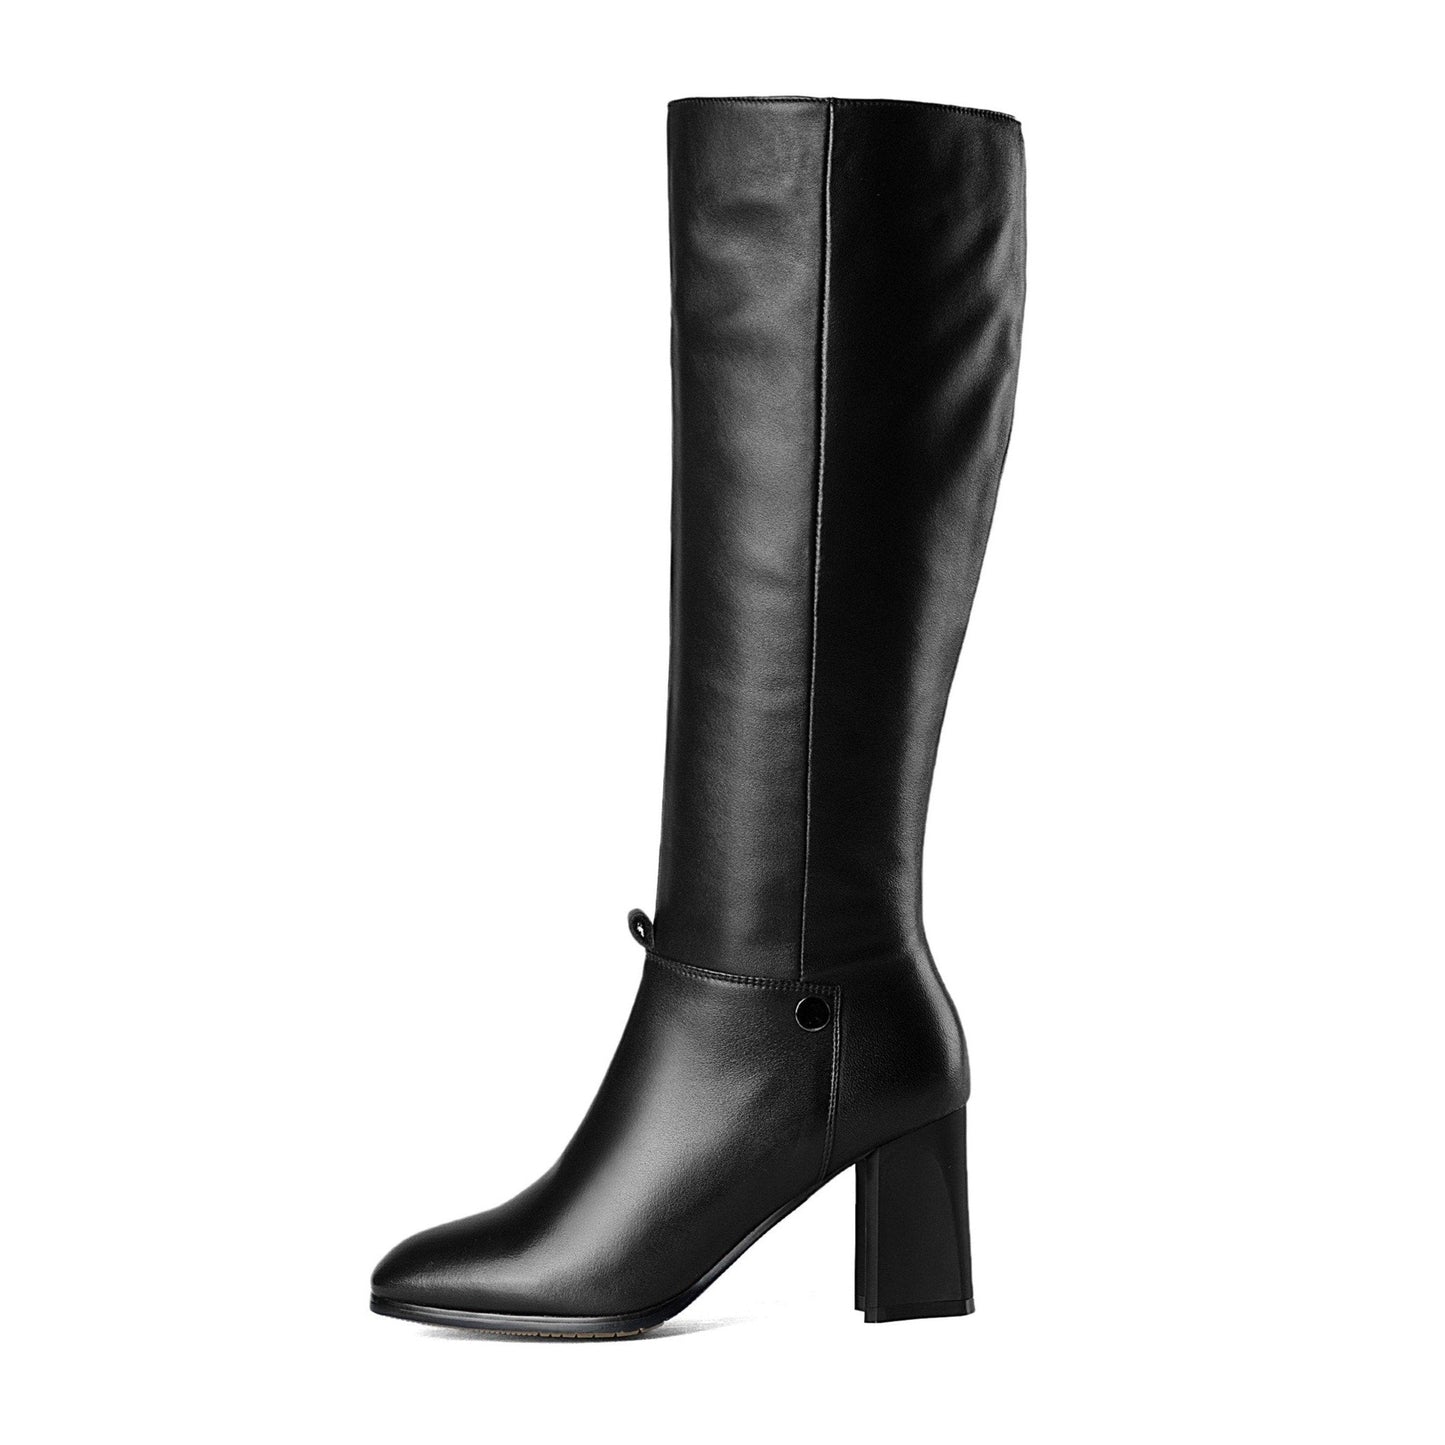 TinaCus Genuine Leather Square Toe Chunky Heel comfortable Knee High Boots